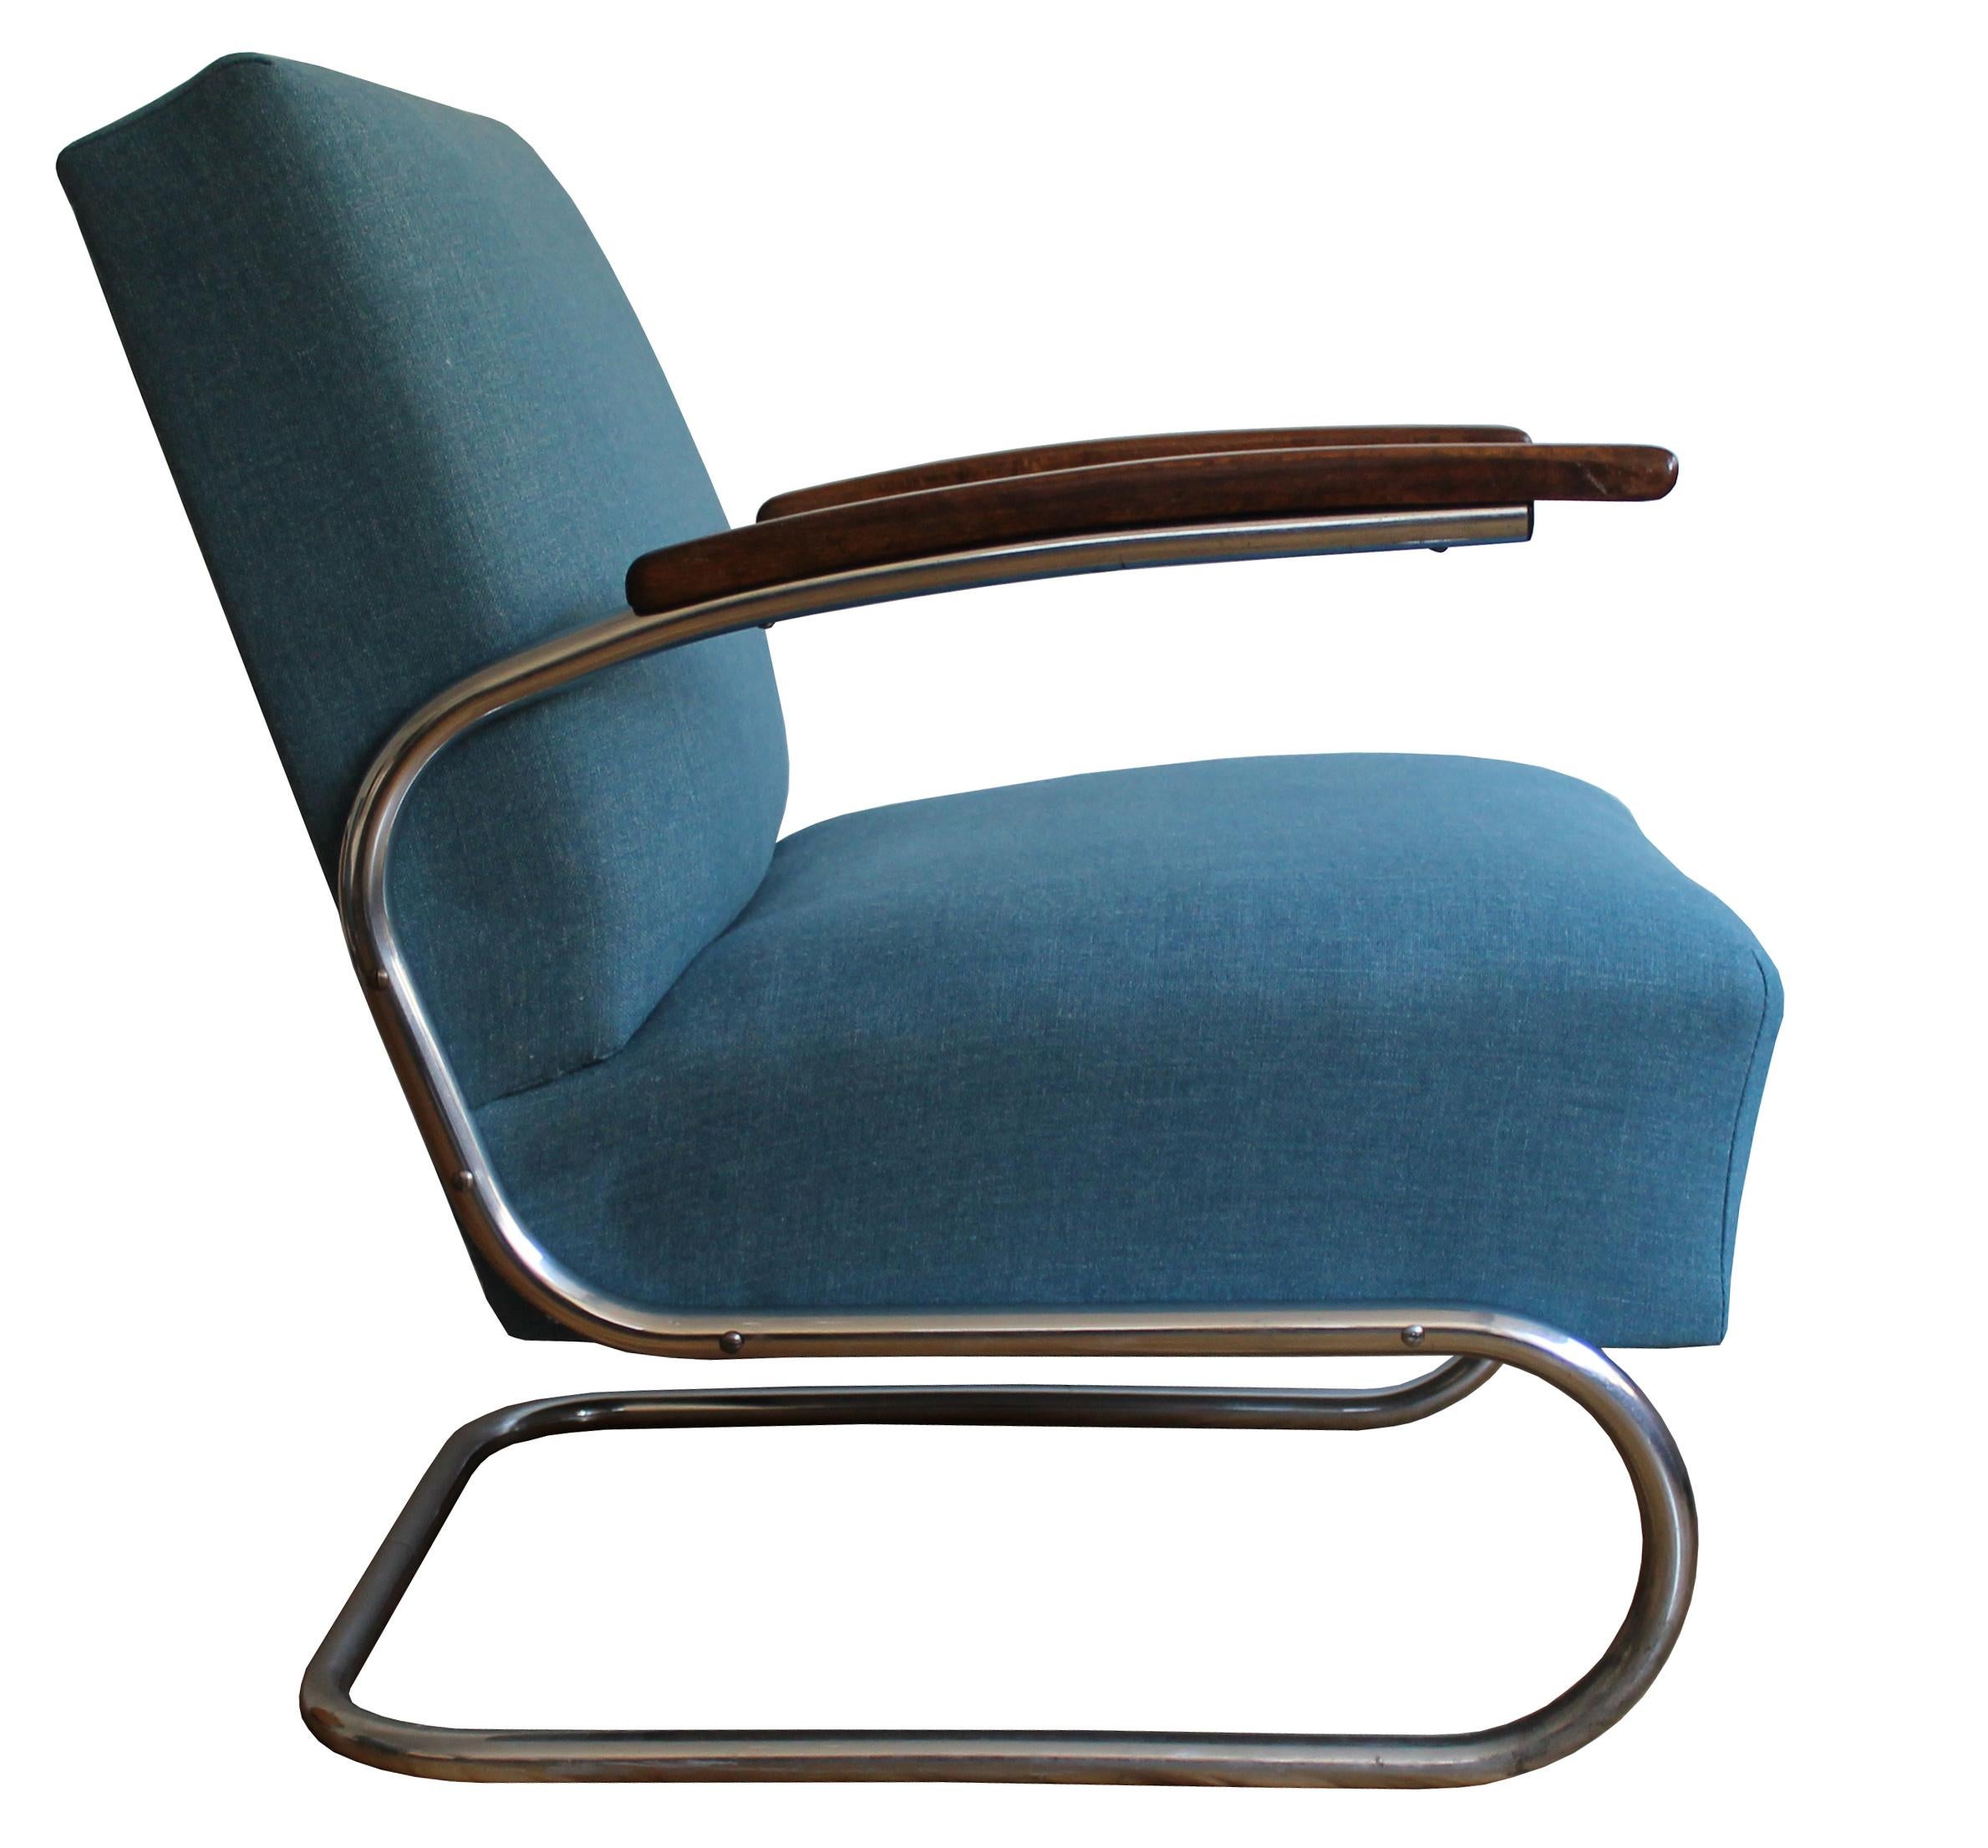 This Modernist Lounge chair was produced in the late 1930's by The Gottwald Company in Czechoslovakia. Gottwald gained a licence from Thonet to sell chairs similar to Thonet's original K 411 armchairs. The letter ‘K’ in this case stands for Knoll